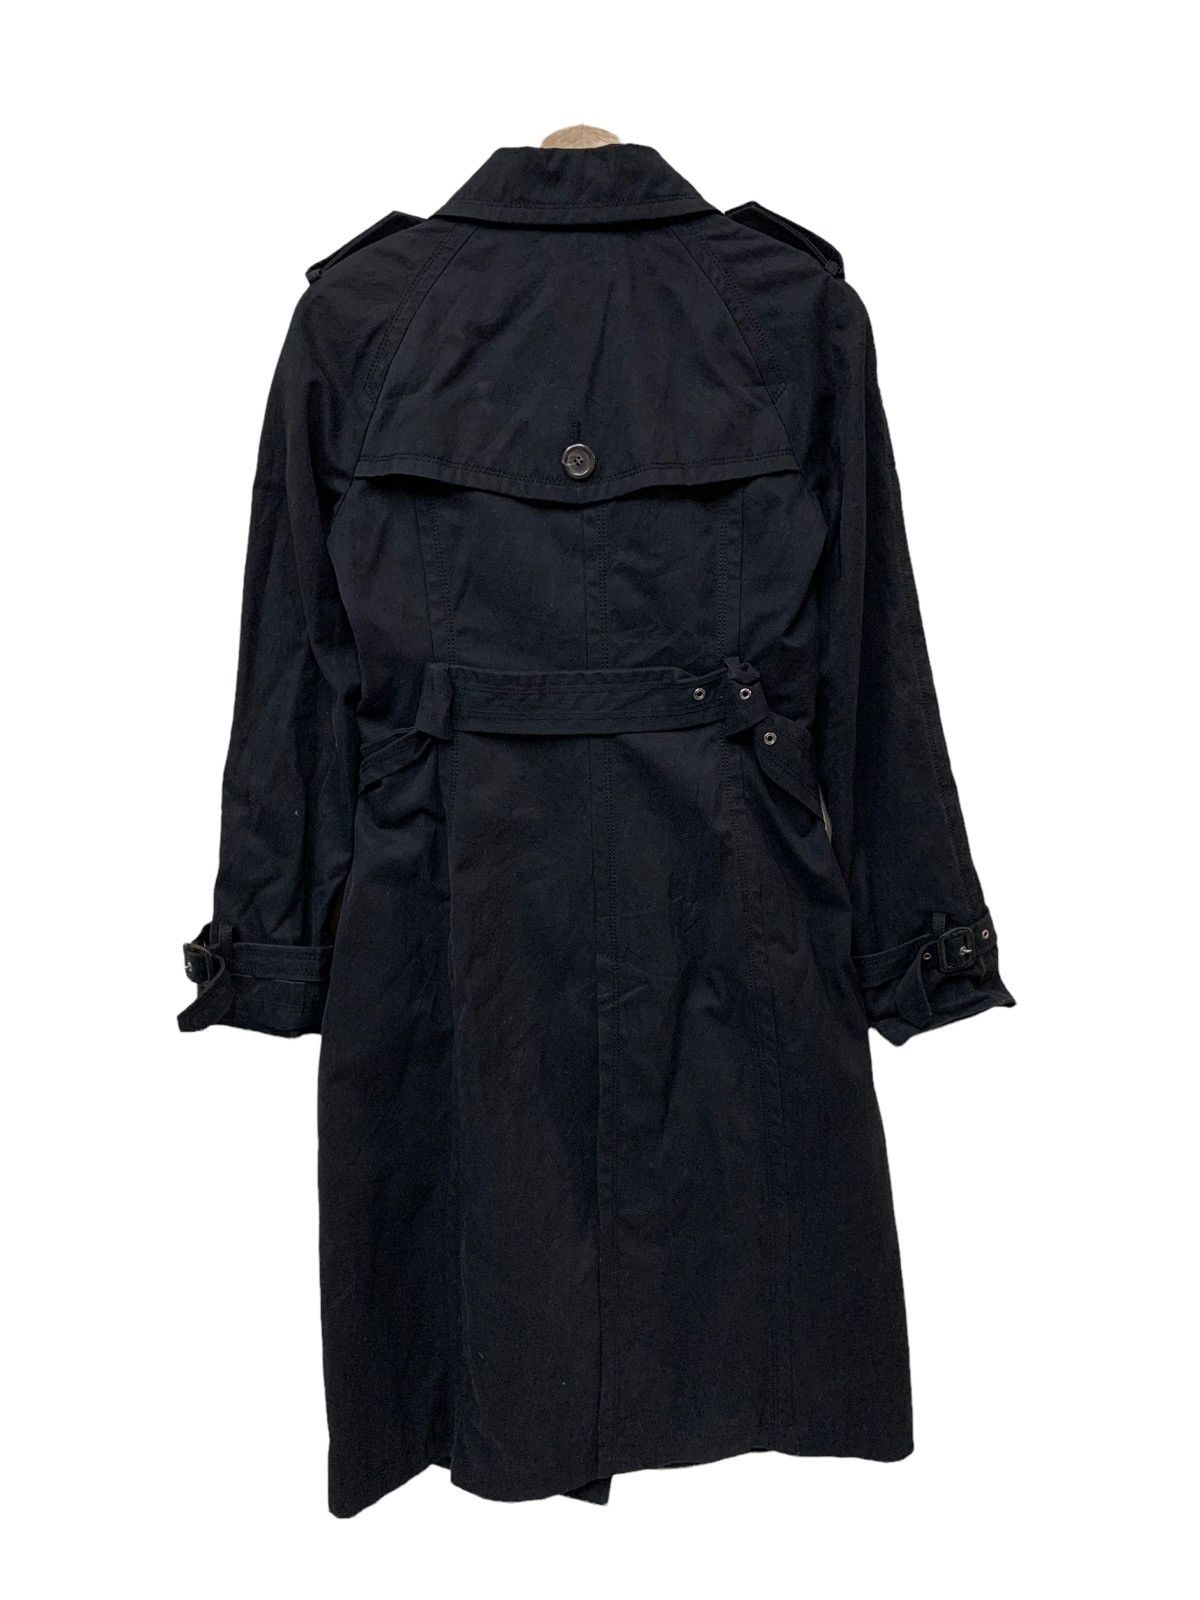 🔥BURBERRY BLUE LABEL WOOL CHERRY LINED TRENCH COAT - 9